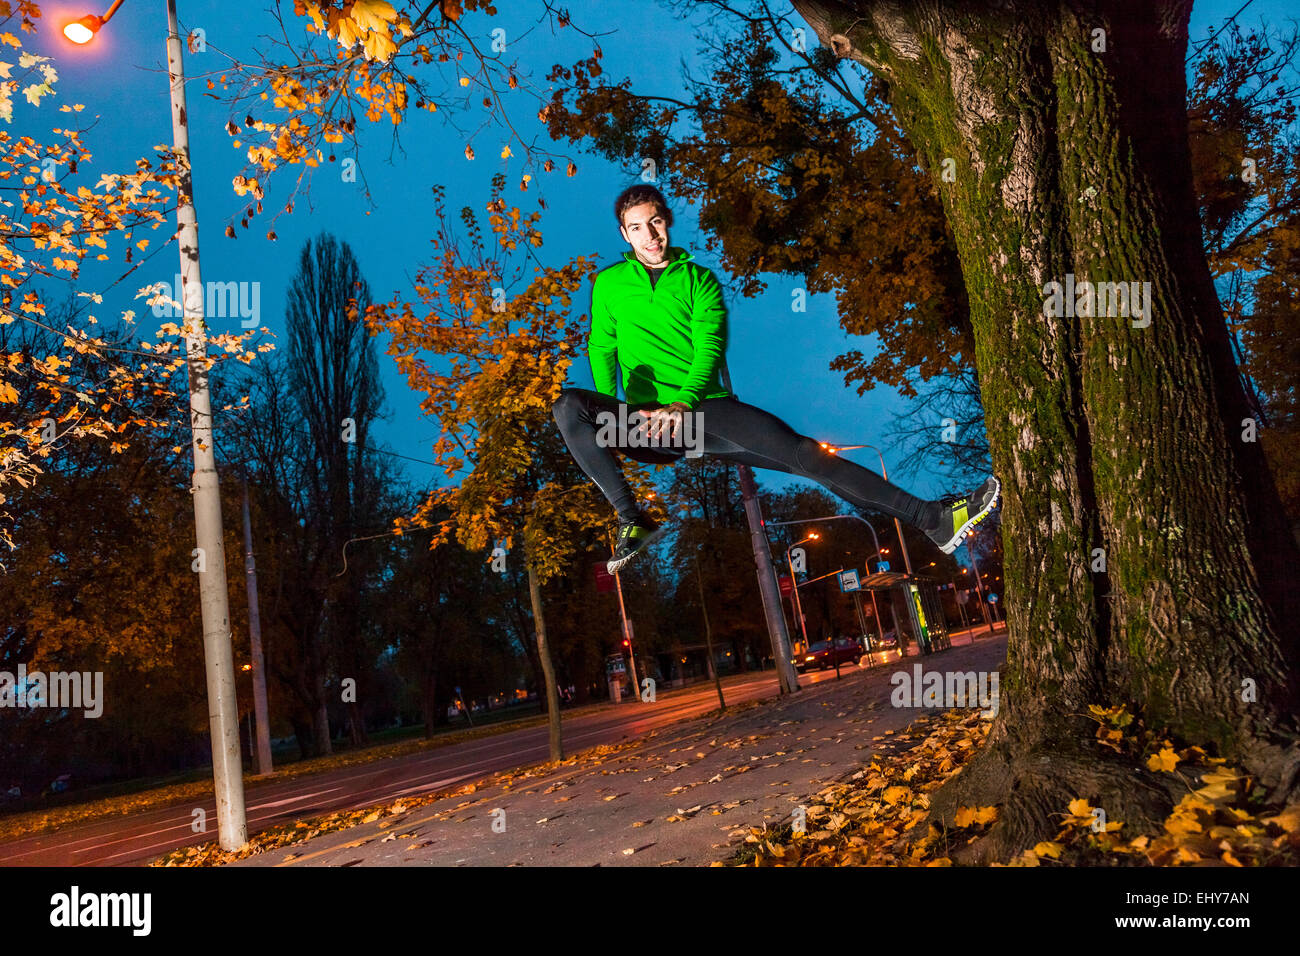 Male runner jumping in park Stock Photo